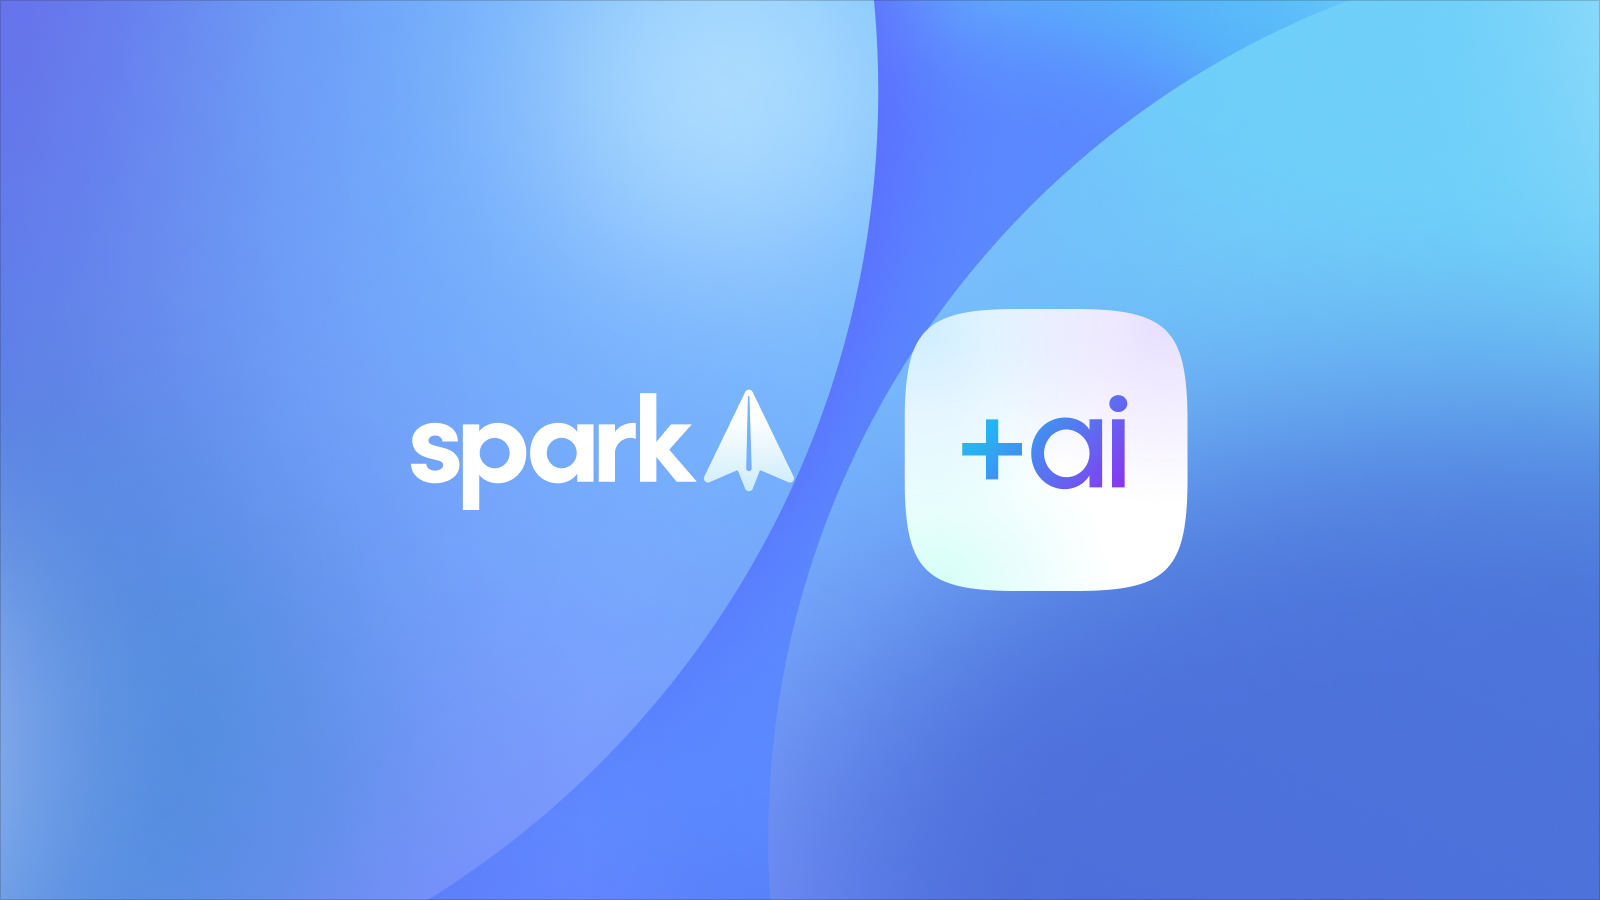 Introducing Spark +AI: your personal email assistant